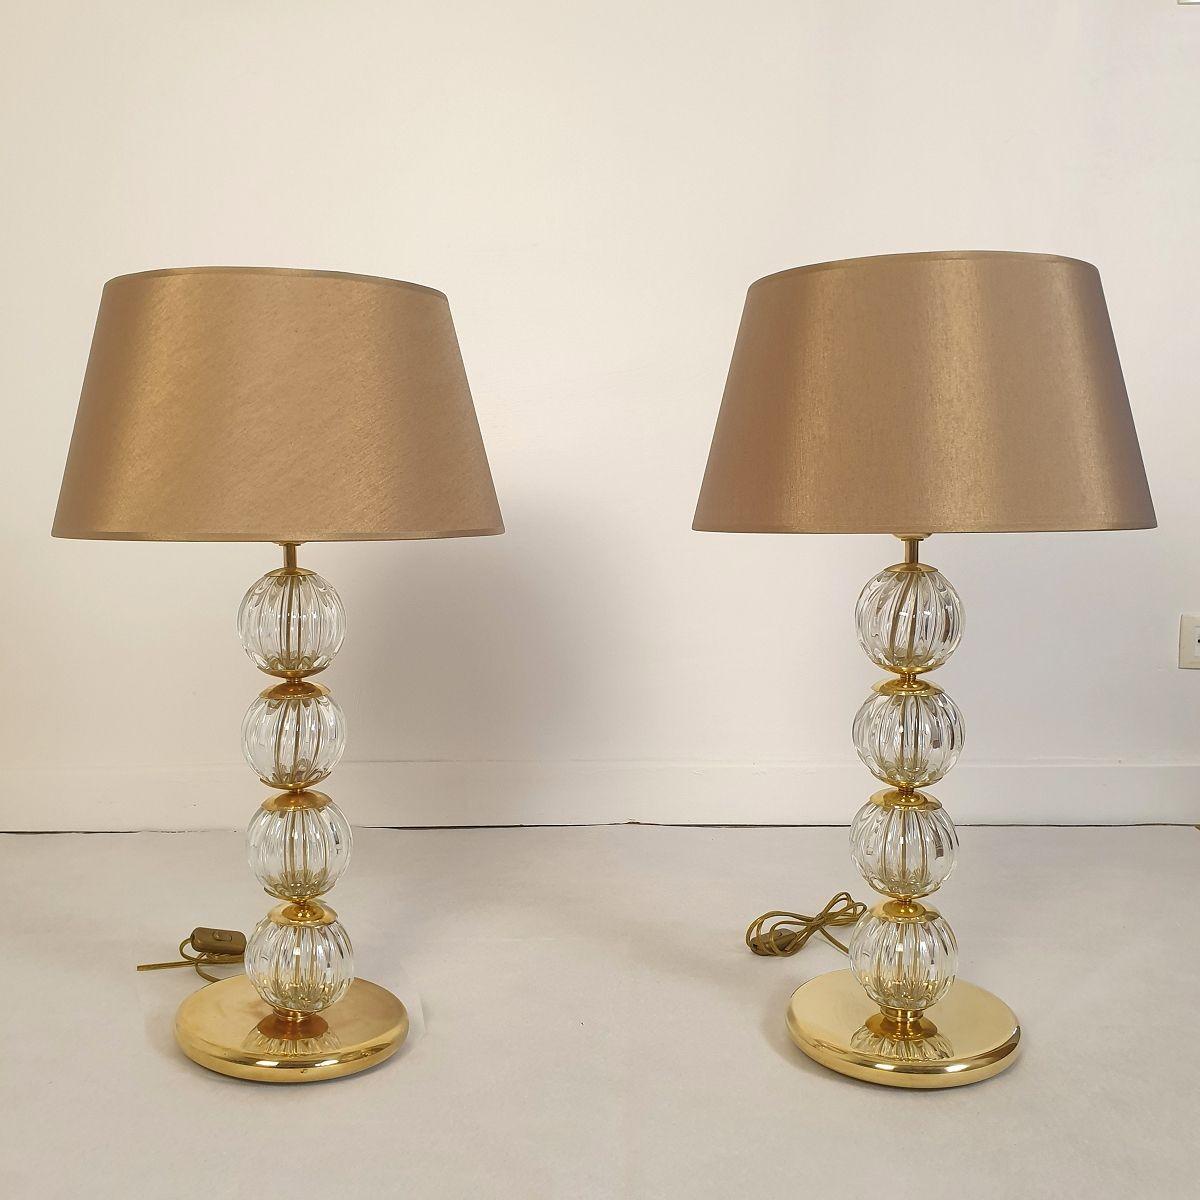 Pair of Murano glass Mid Century table lamps, Barovier style, Italy 1970s.
The Italian lamps are made of brass and clear handmade Murano glass balls.
Each Murano glass sphere is 3.95 in in diameter.
The vintage lamps have one light each and are